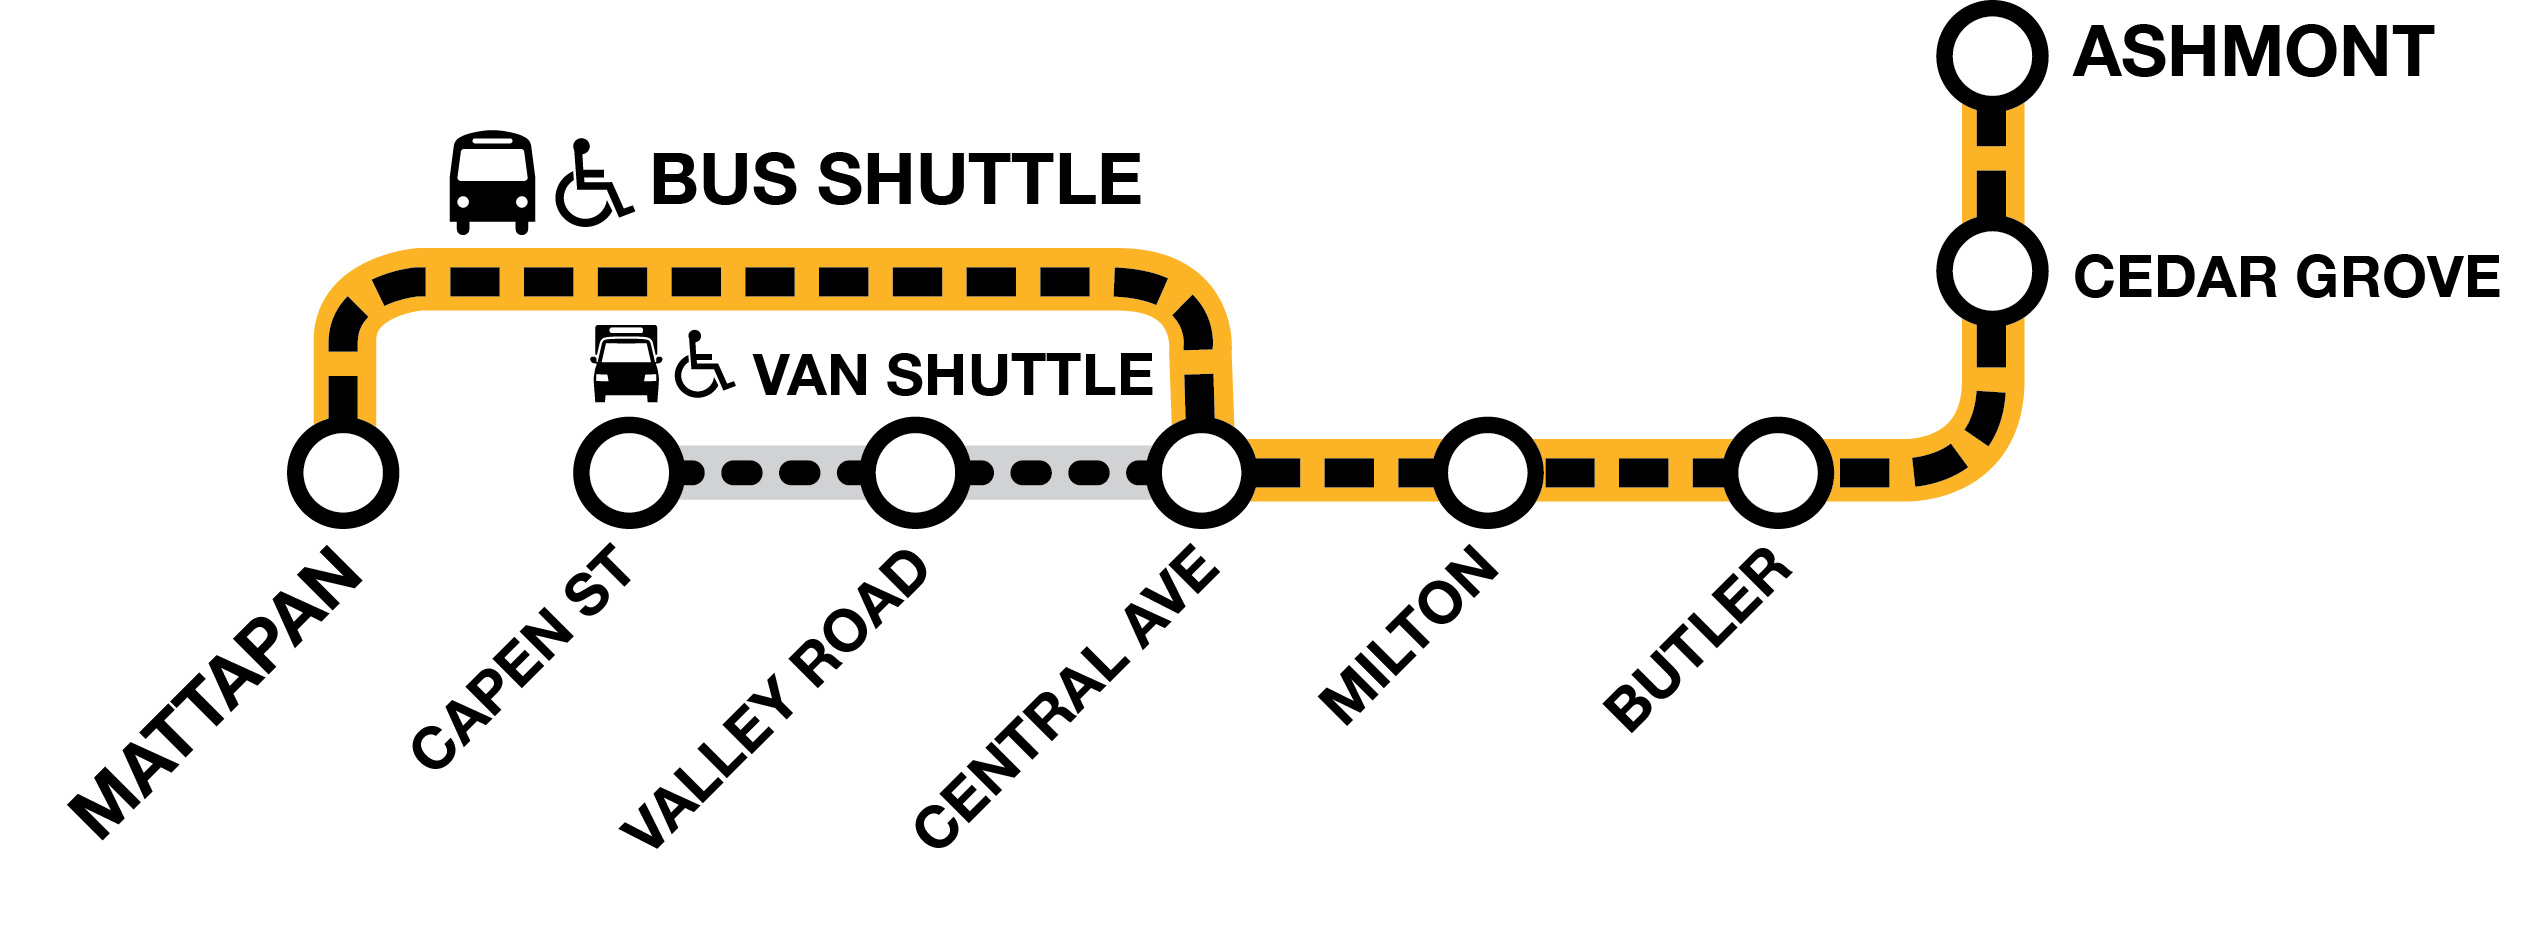 Line graphic that show stops on the Mattapan line, indicating that van shuttles service Capen St, Valley Rd, and Central Ave, where all other stops are served by bus shuttles.